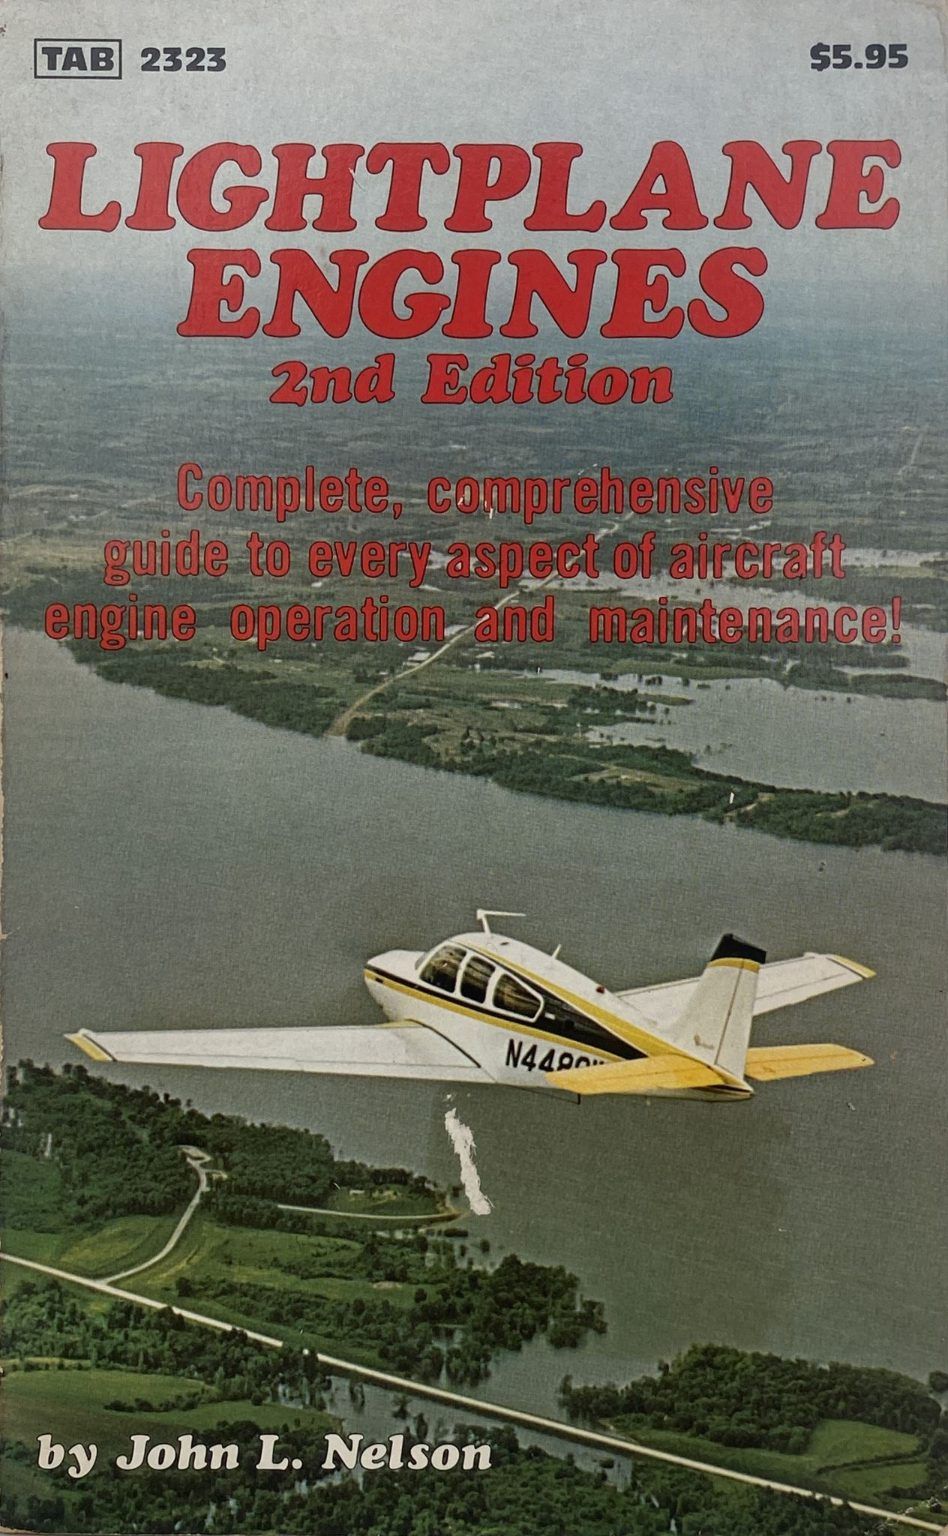 LIGHTPLANE ENGINES: Guide to every aspect of Aircraft Engines